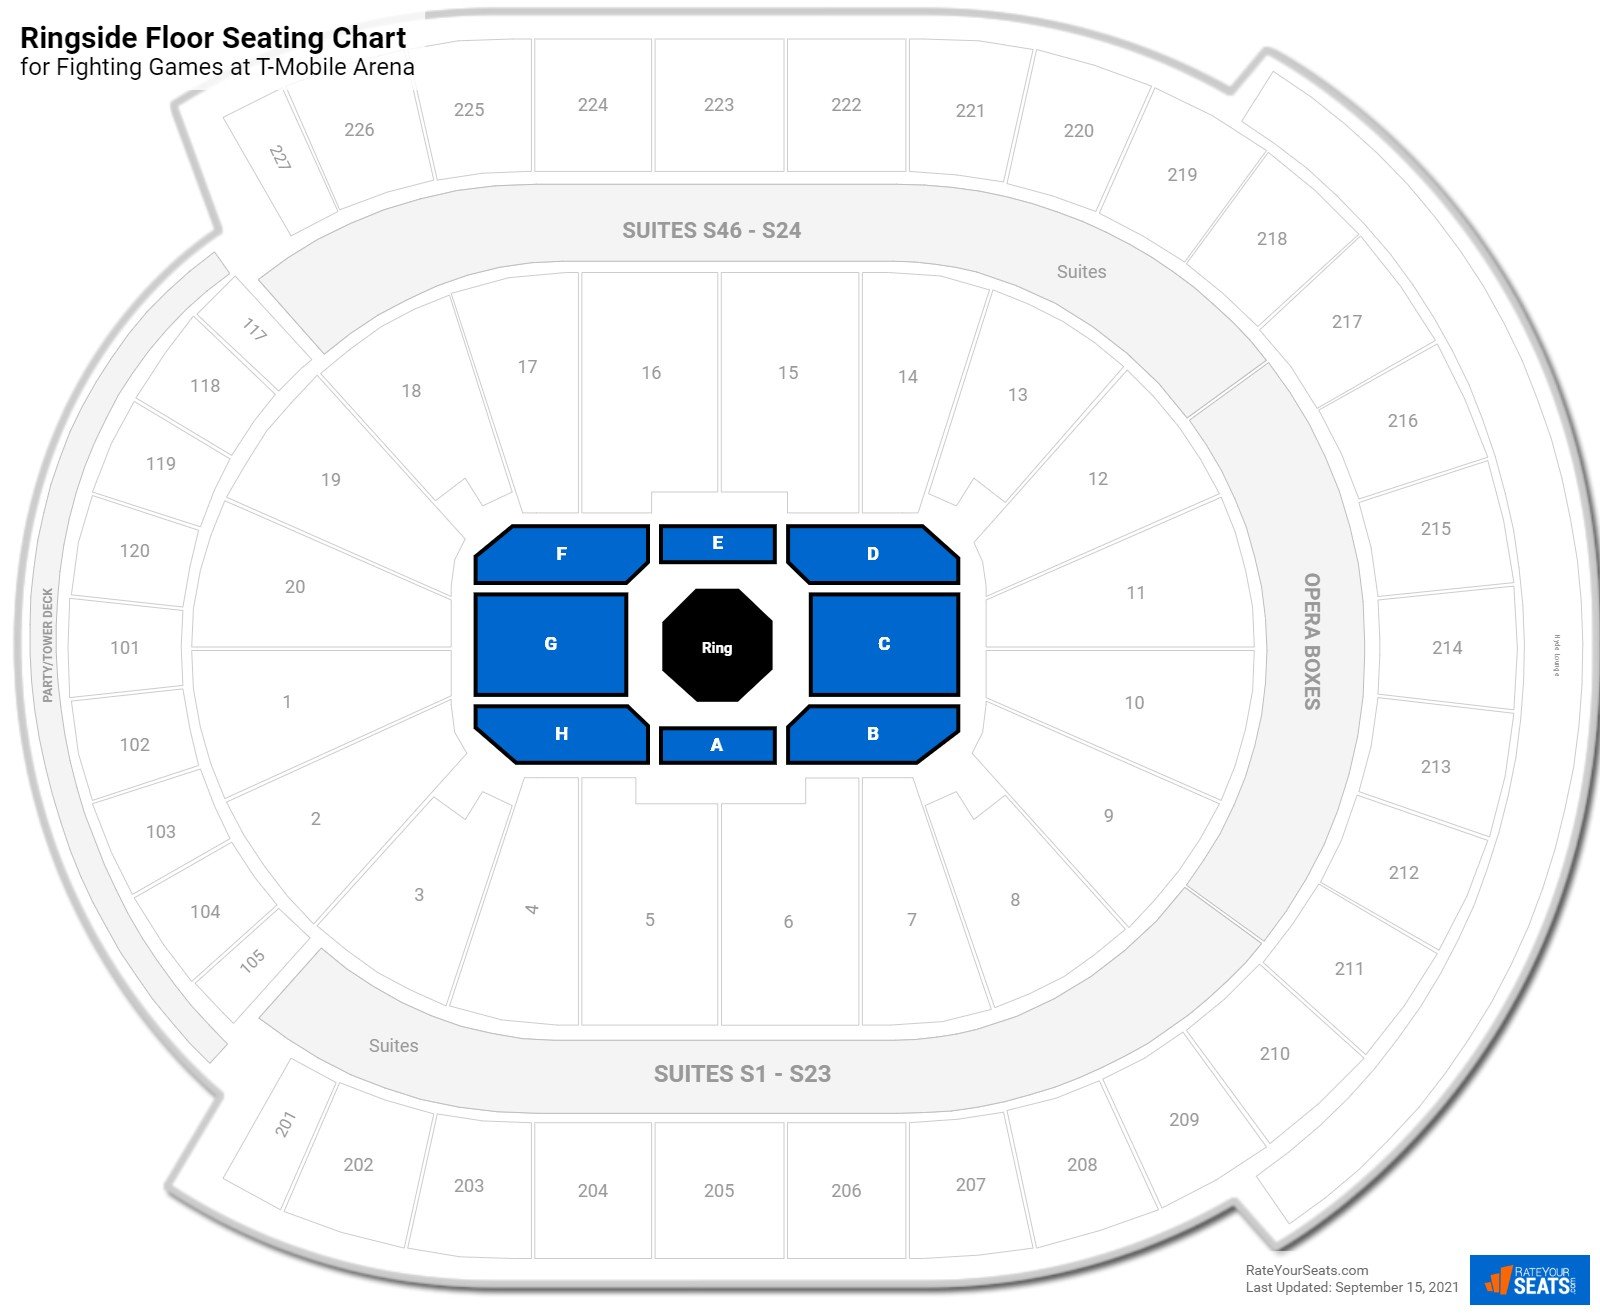 Fighting Ringside Floor Seating Chart at T-Mobile Arena